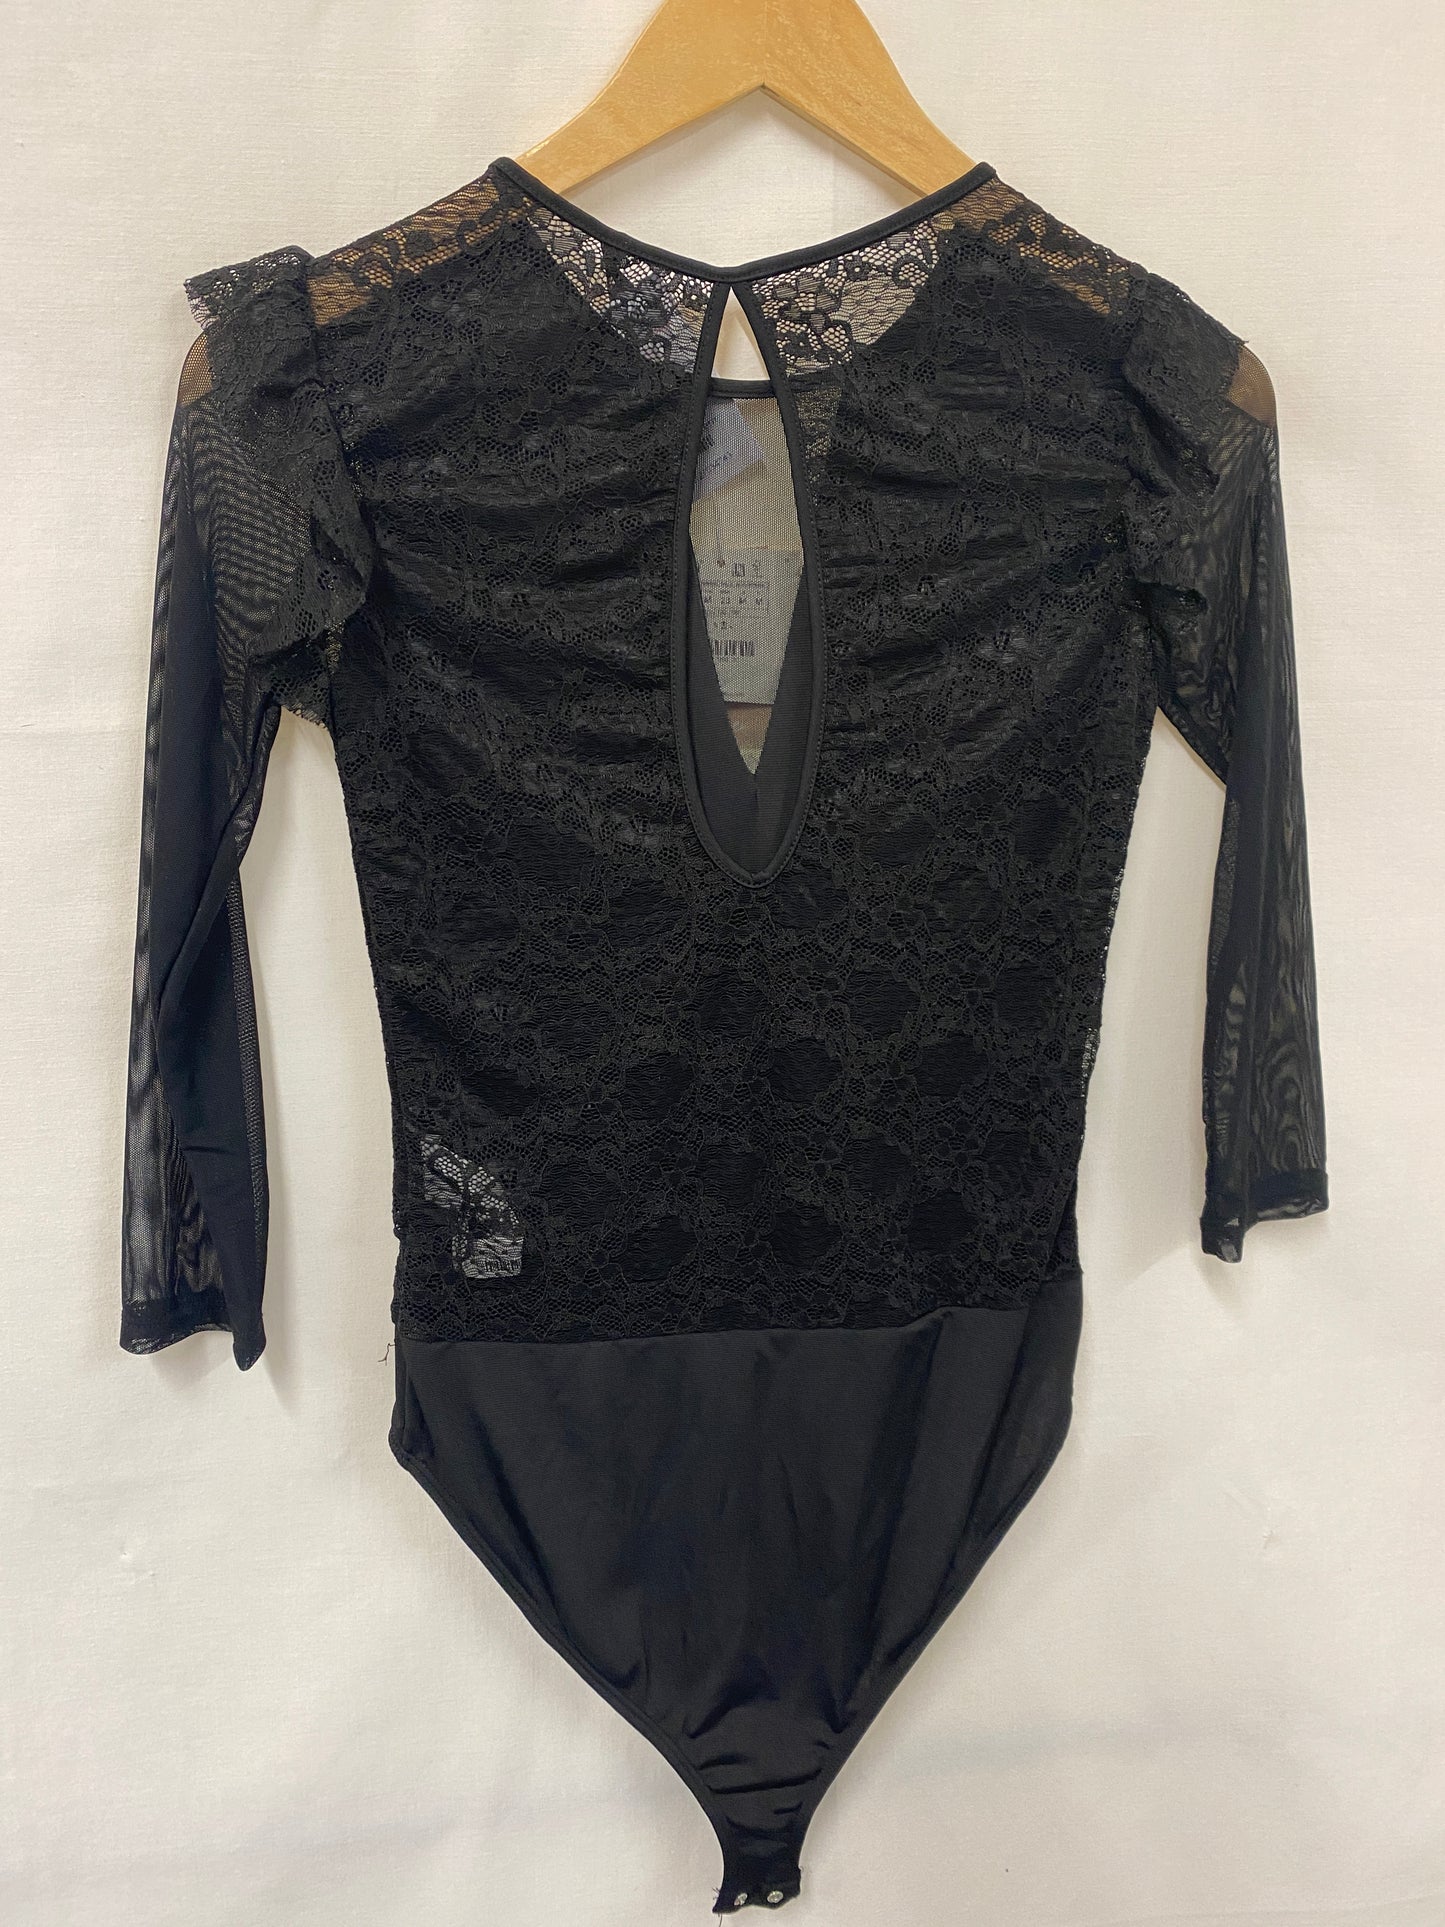 BNWT Black Lace Body Suit With Sheer Panels Size m